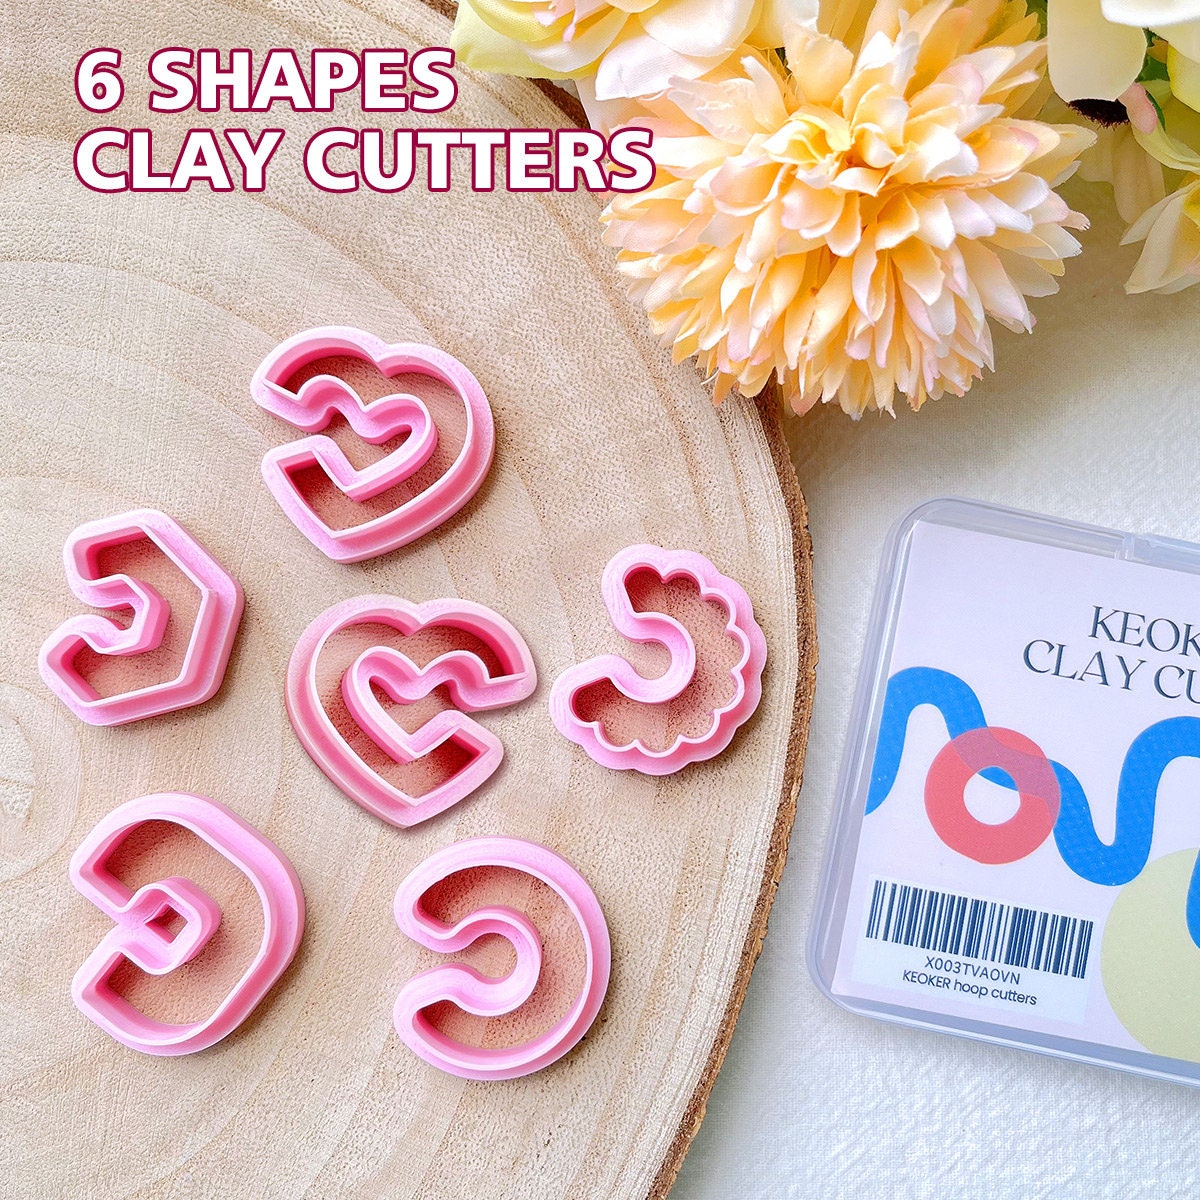 Keoker Clay Cutters for Polymer Clay Jewelry, Hoop Polymer Clay Cutters for  Earrings Jewelry Making(6 Shapes)